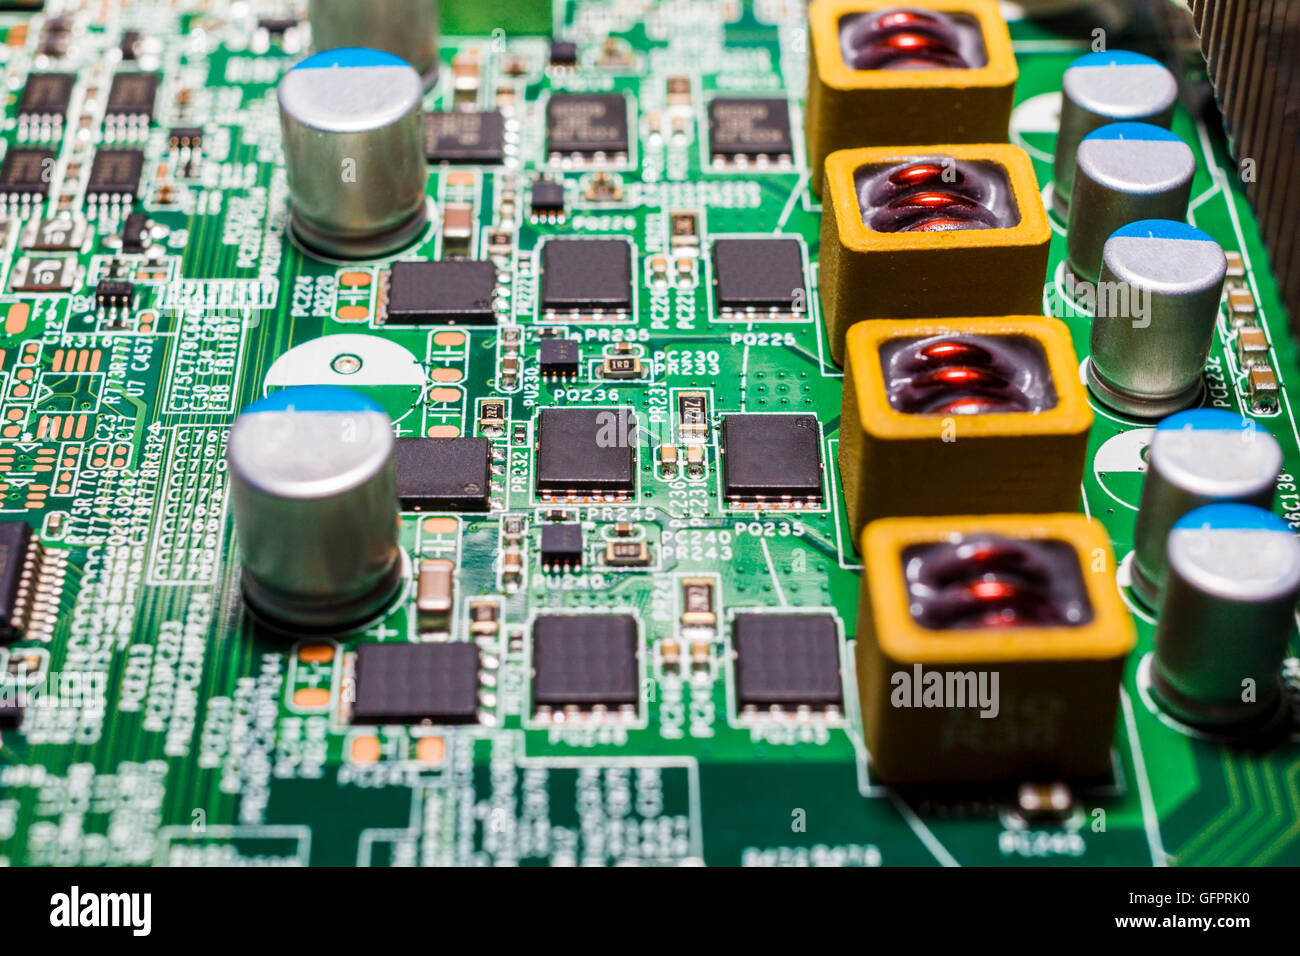 Close up shot of microchips and resistors on a circuit board, could represent the electronics industry Stock Photo